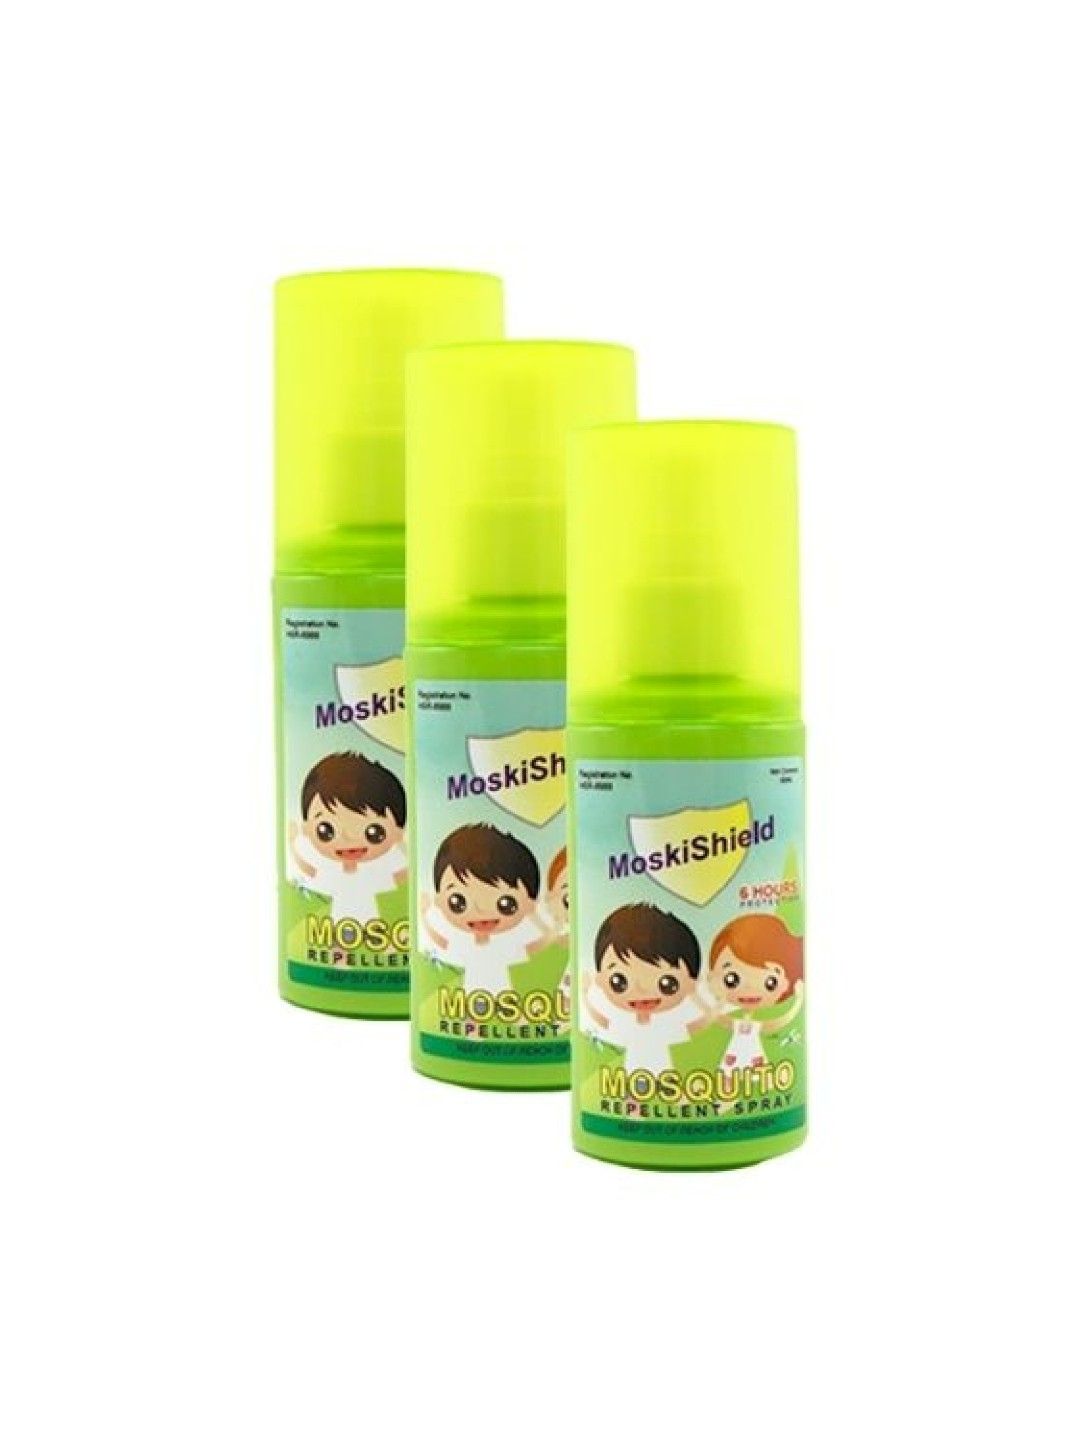 Moskishield Mosquito Repellent Spray Set of 3 (60 mL) (No Color- Image 1)